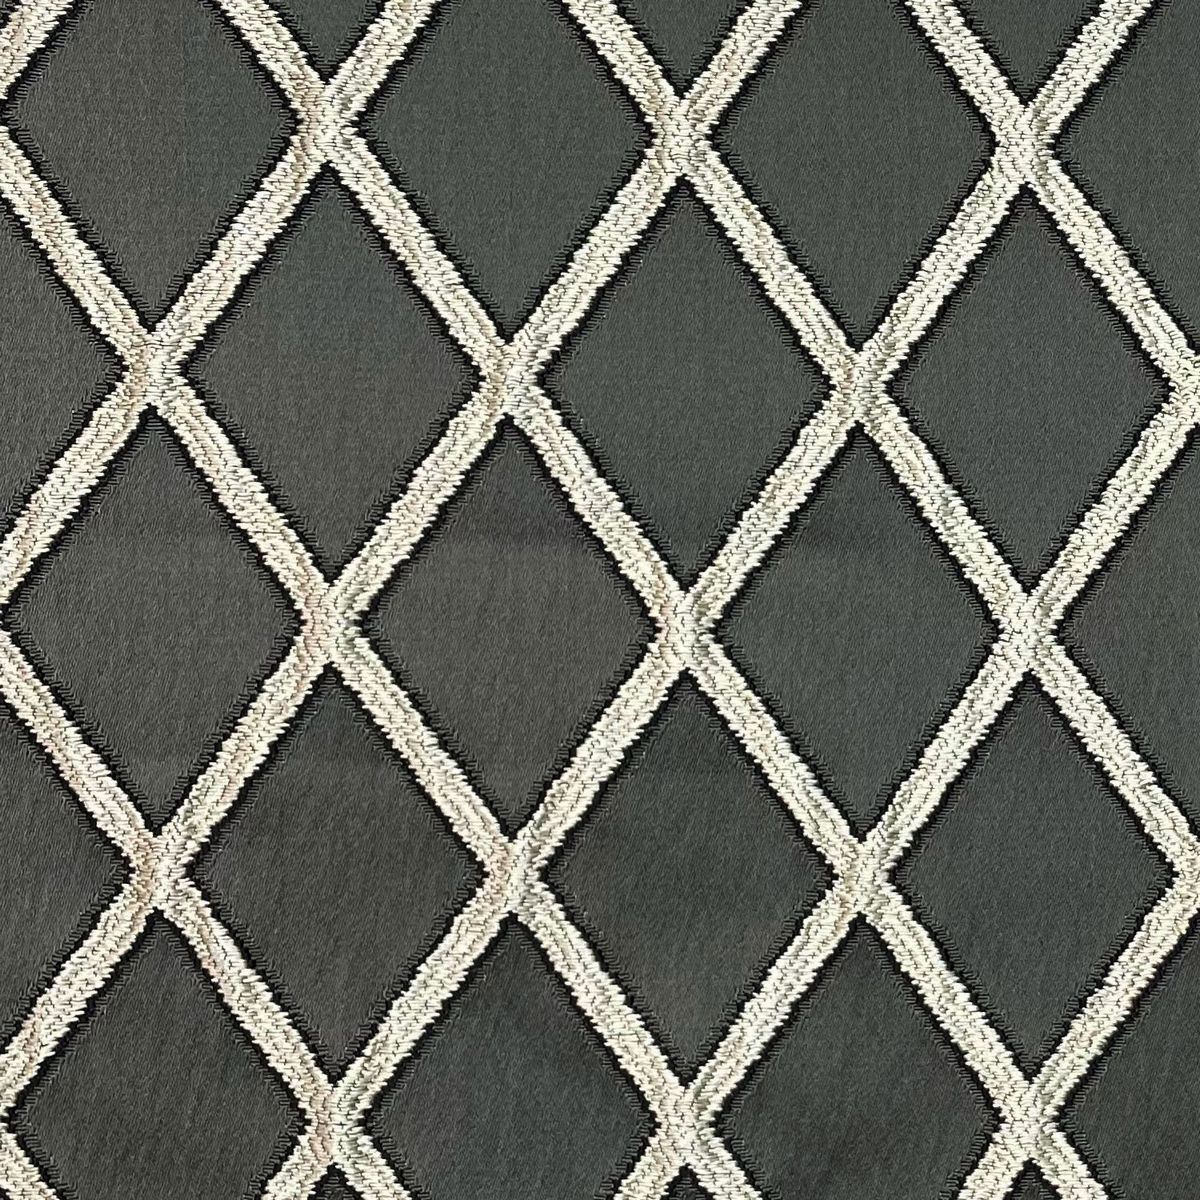 Monza Charcoal Fabric by Chatham Glyn